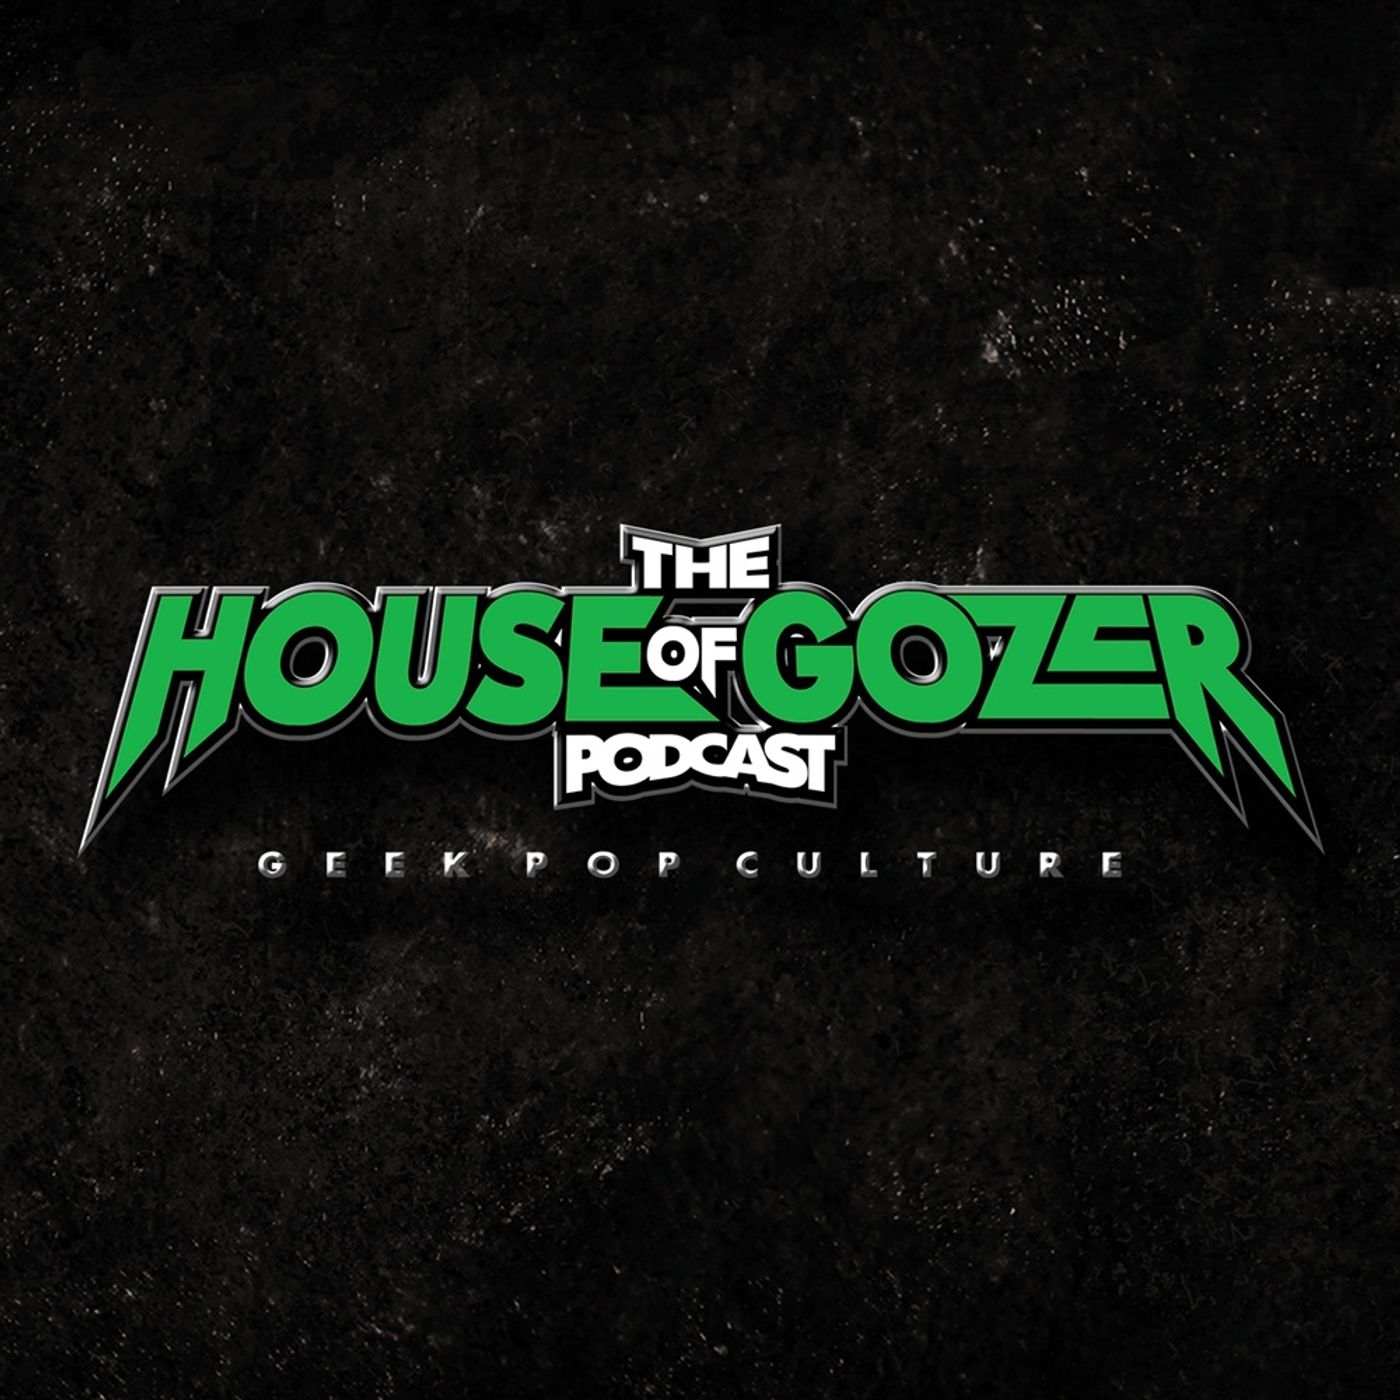 The House of Gozer Podcast – Geek pop culture